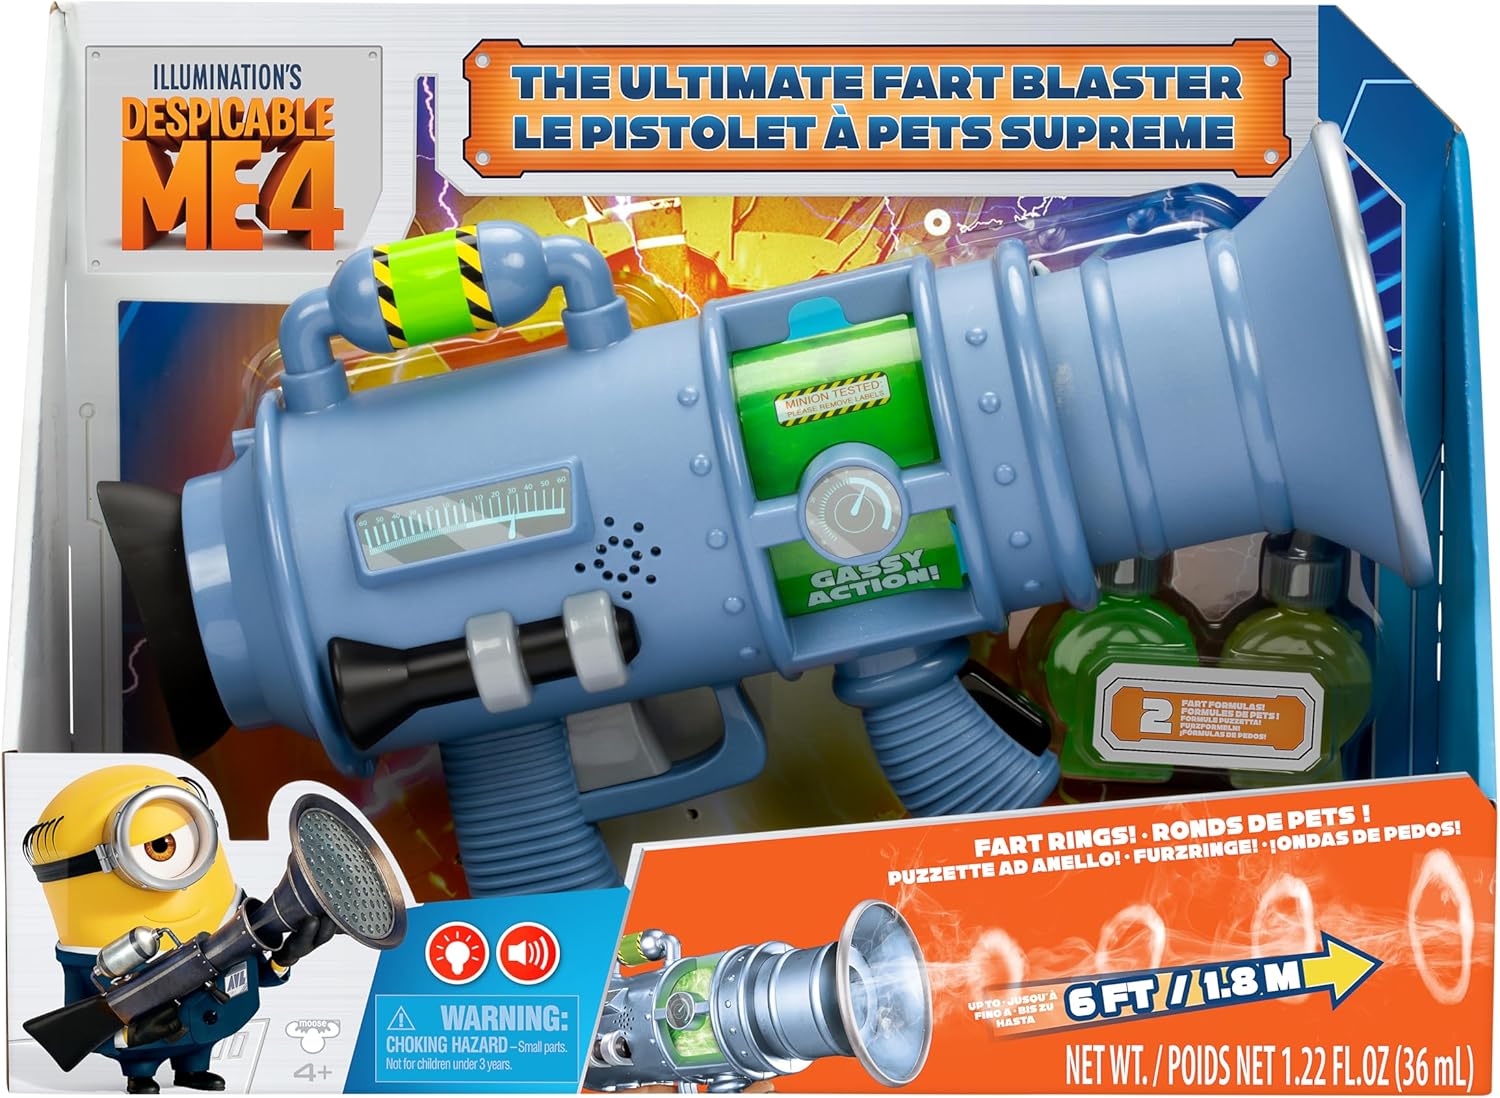 Minions Despicable Me 4 _ The Ultimate Fart Blaster  Blasts Out Real Fart Rings of Fog  Plays 15 D